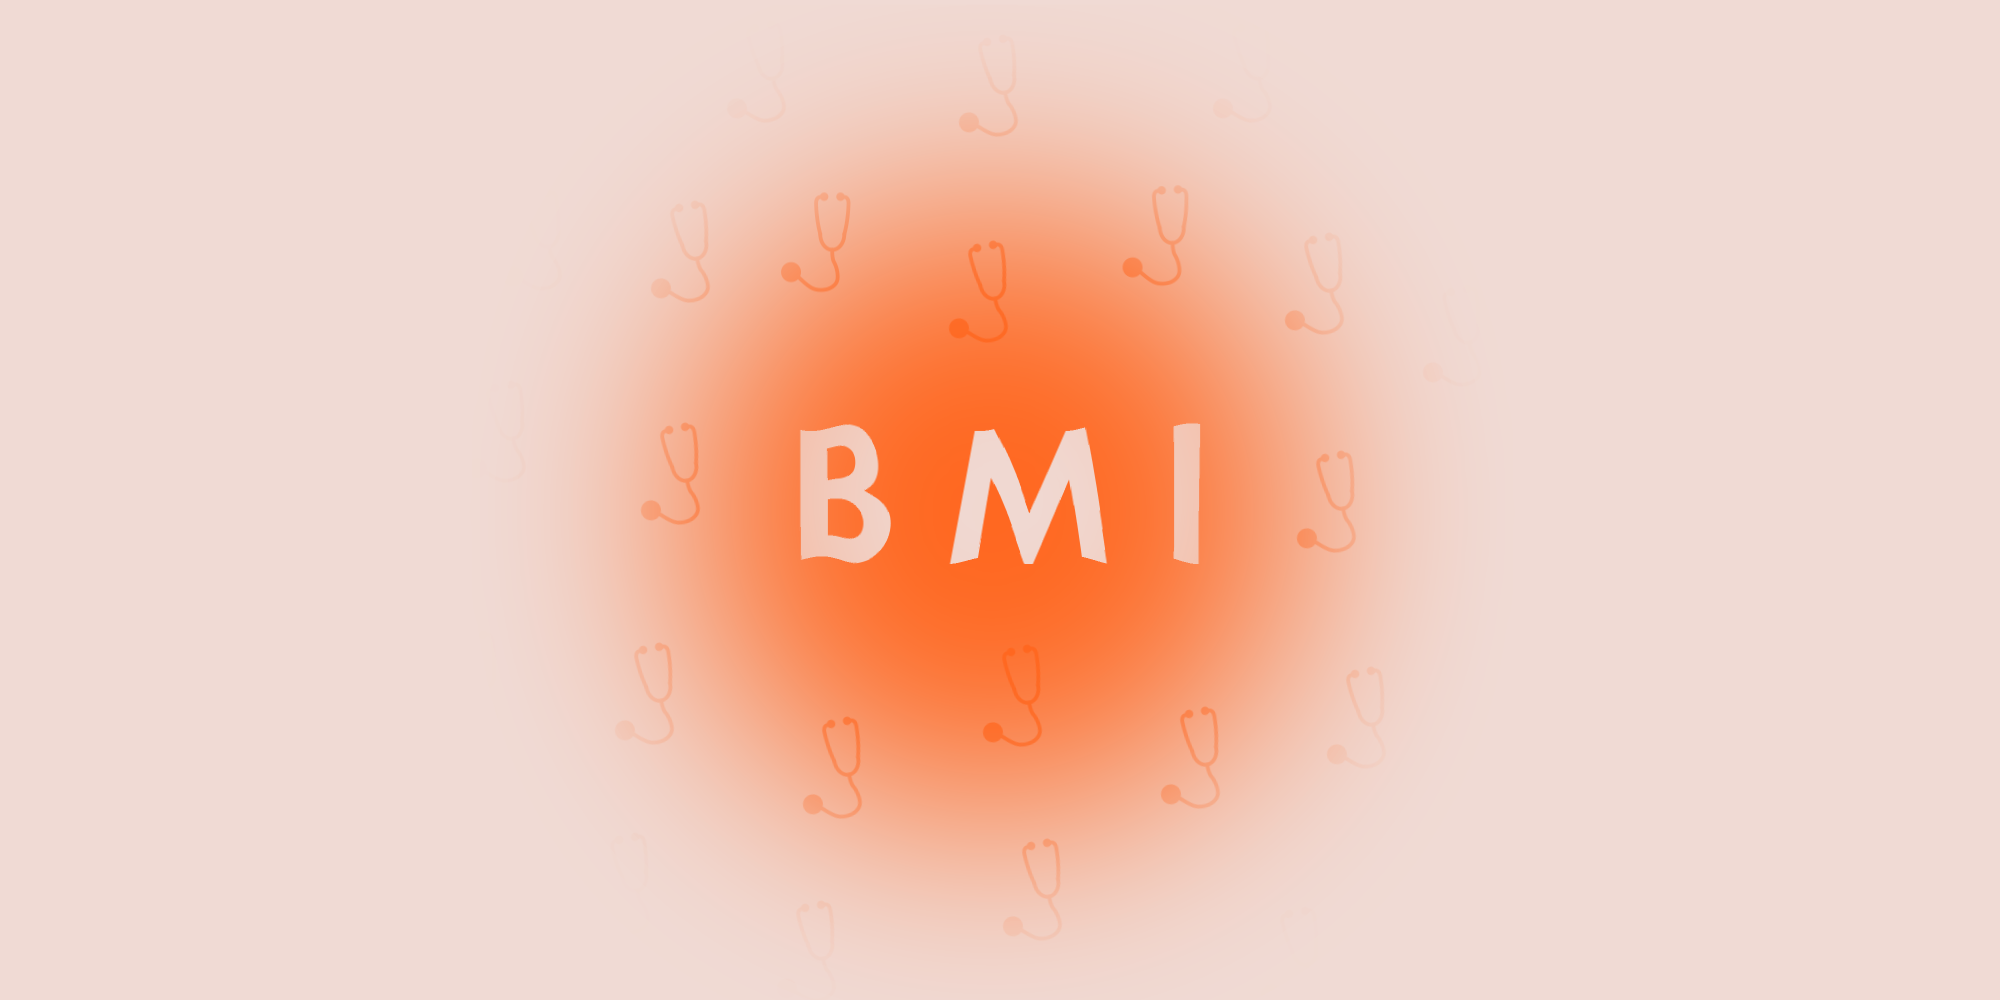 Is BMI doing more harm than good?